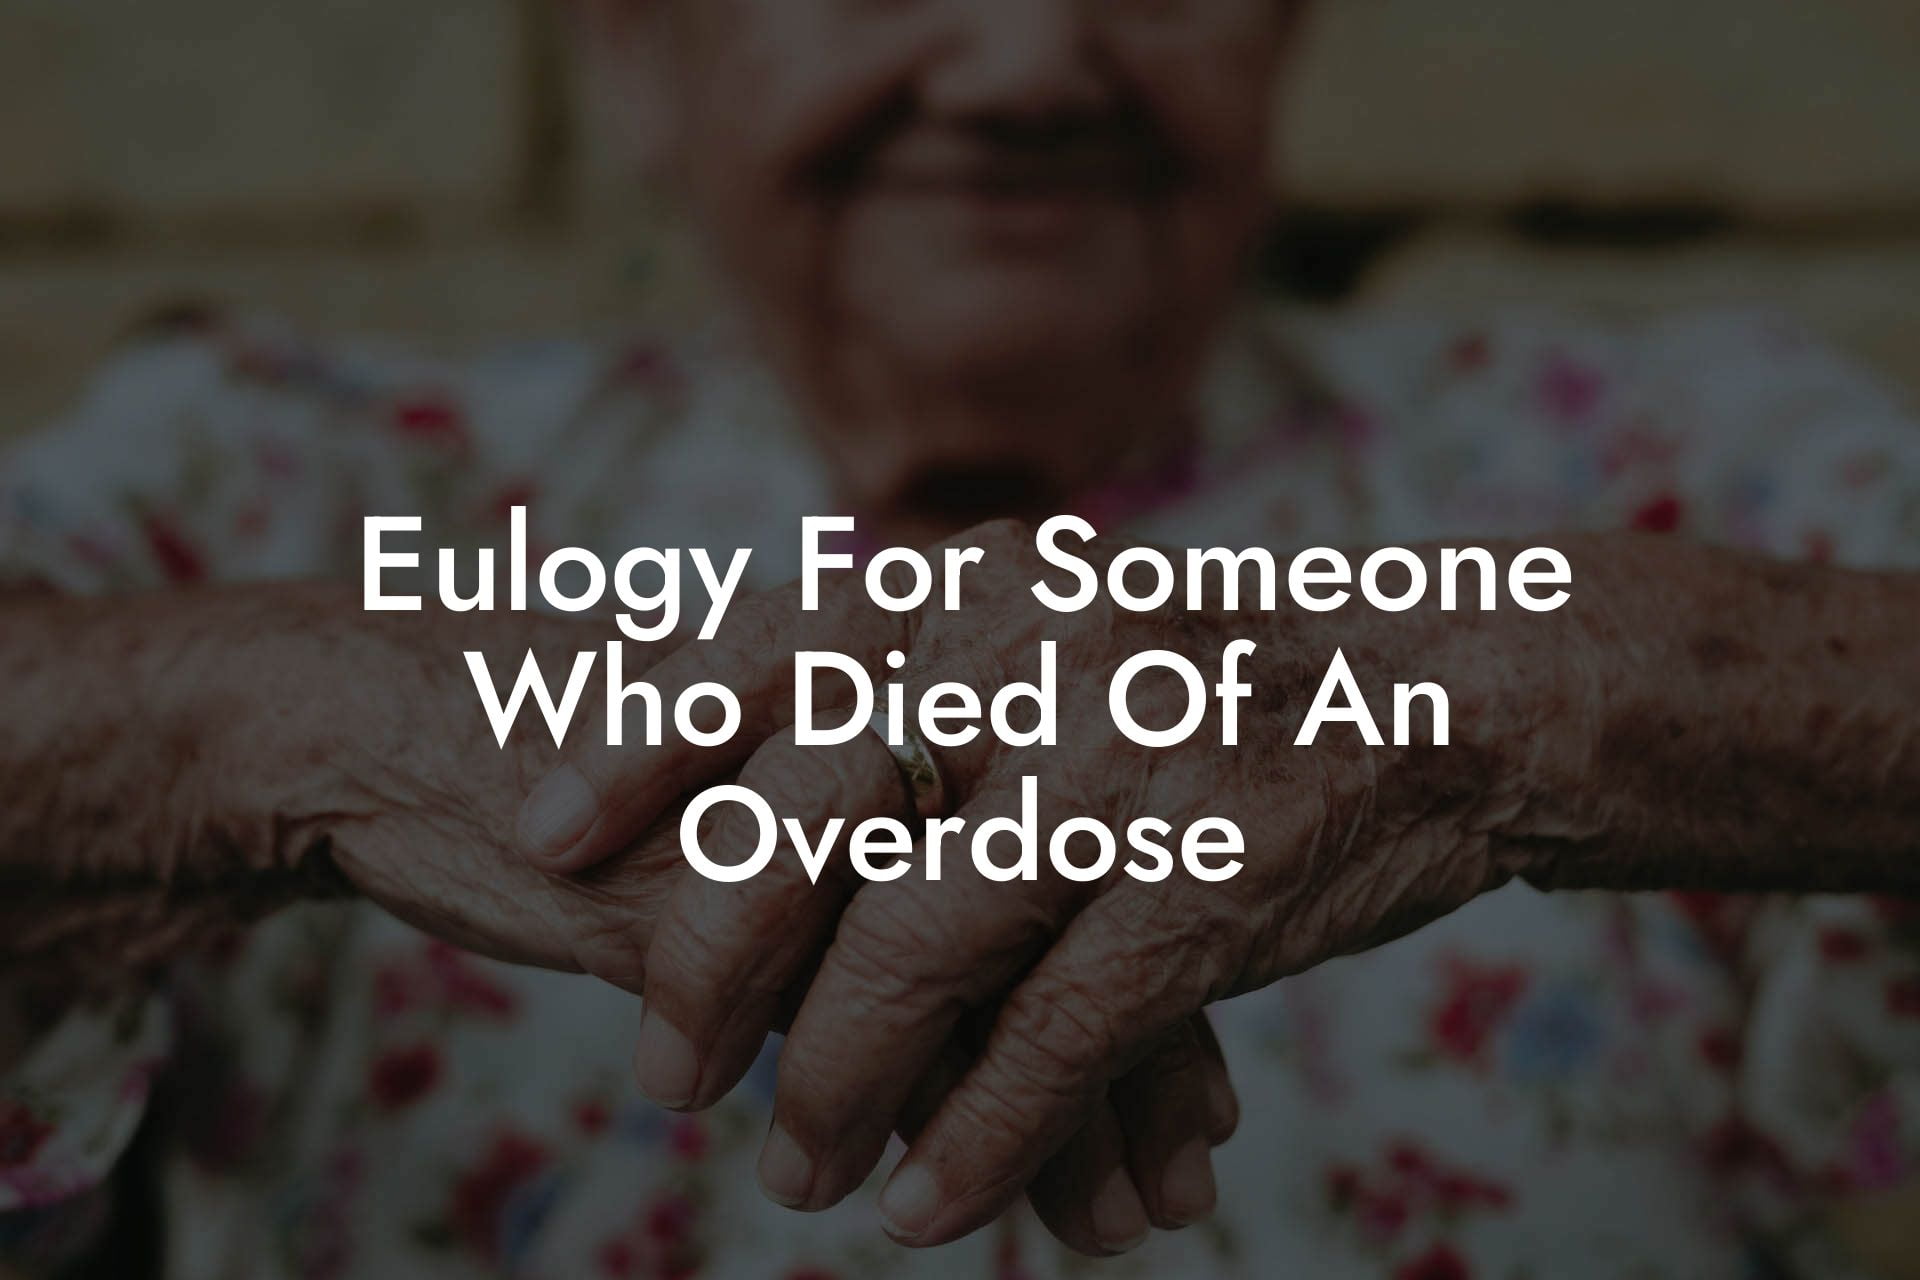 Eulogy For Someone Who Died Of An Overdose